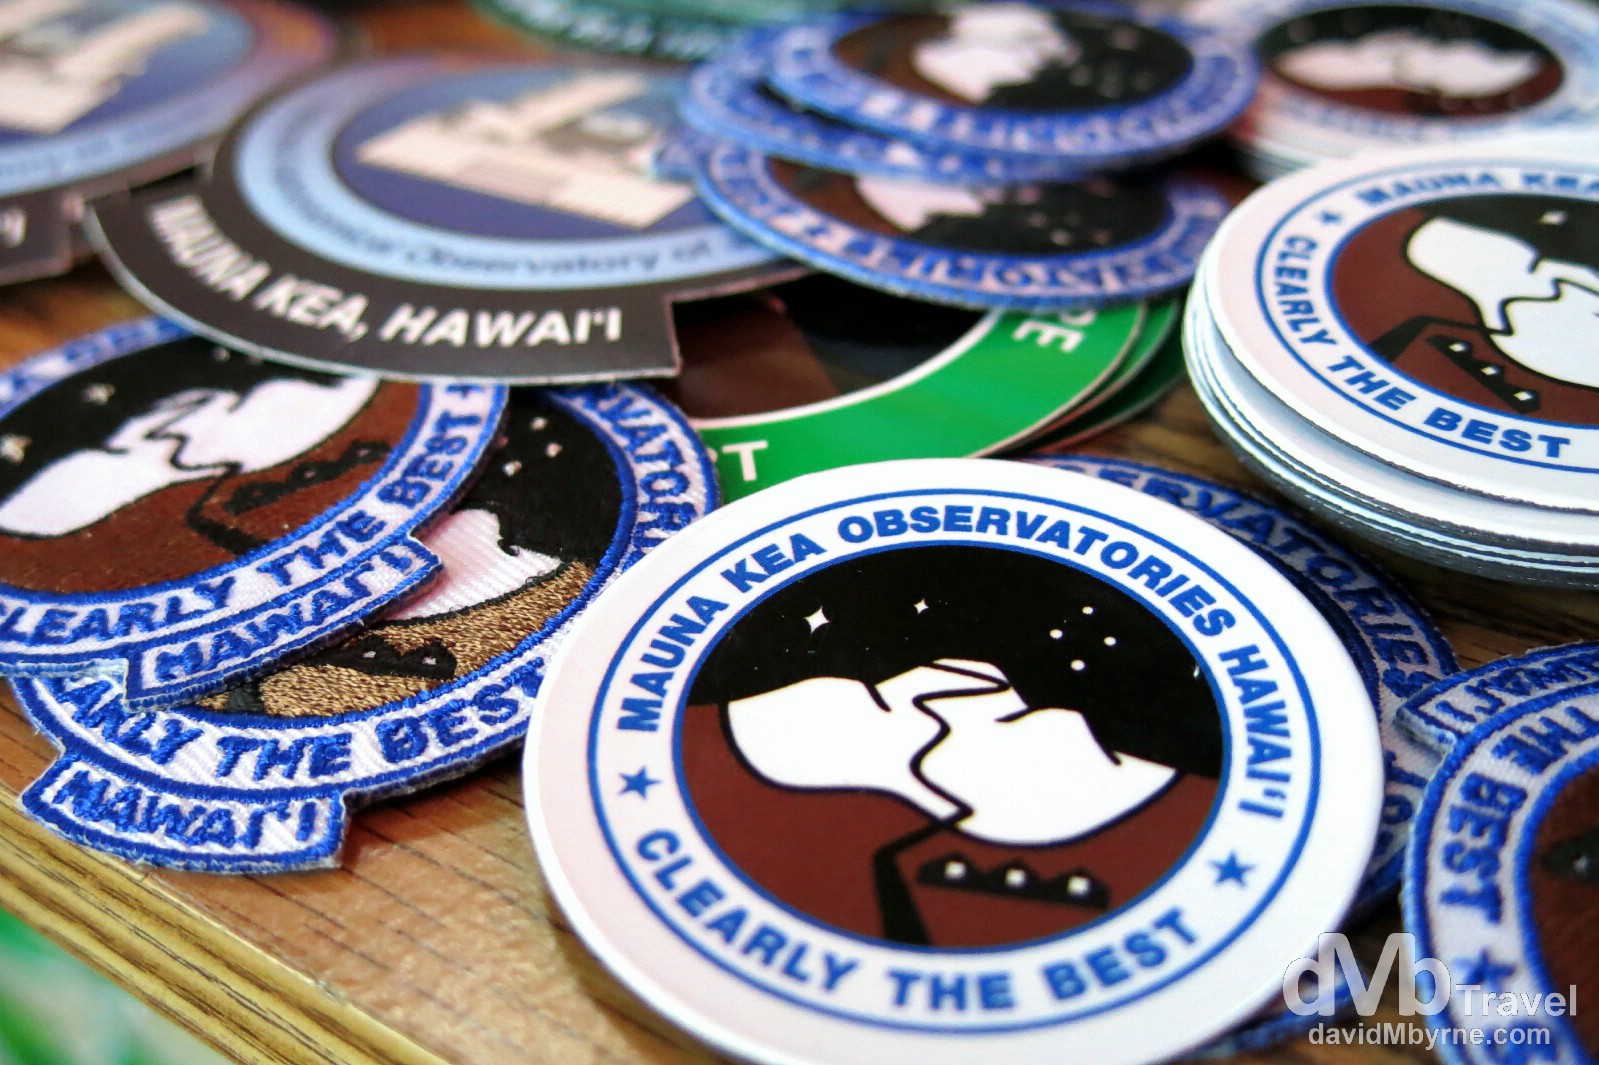 Badges for sale in the Mauna Kea Observatories Visitors Centre, the Big Island of Hawaii, USA. March 3rd 2013.